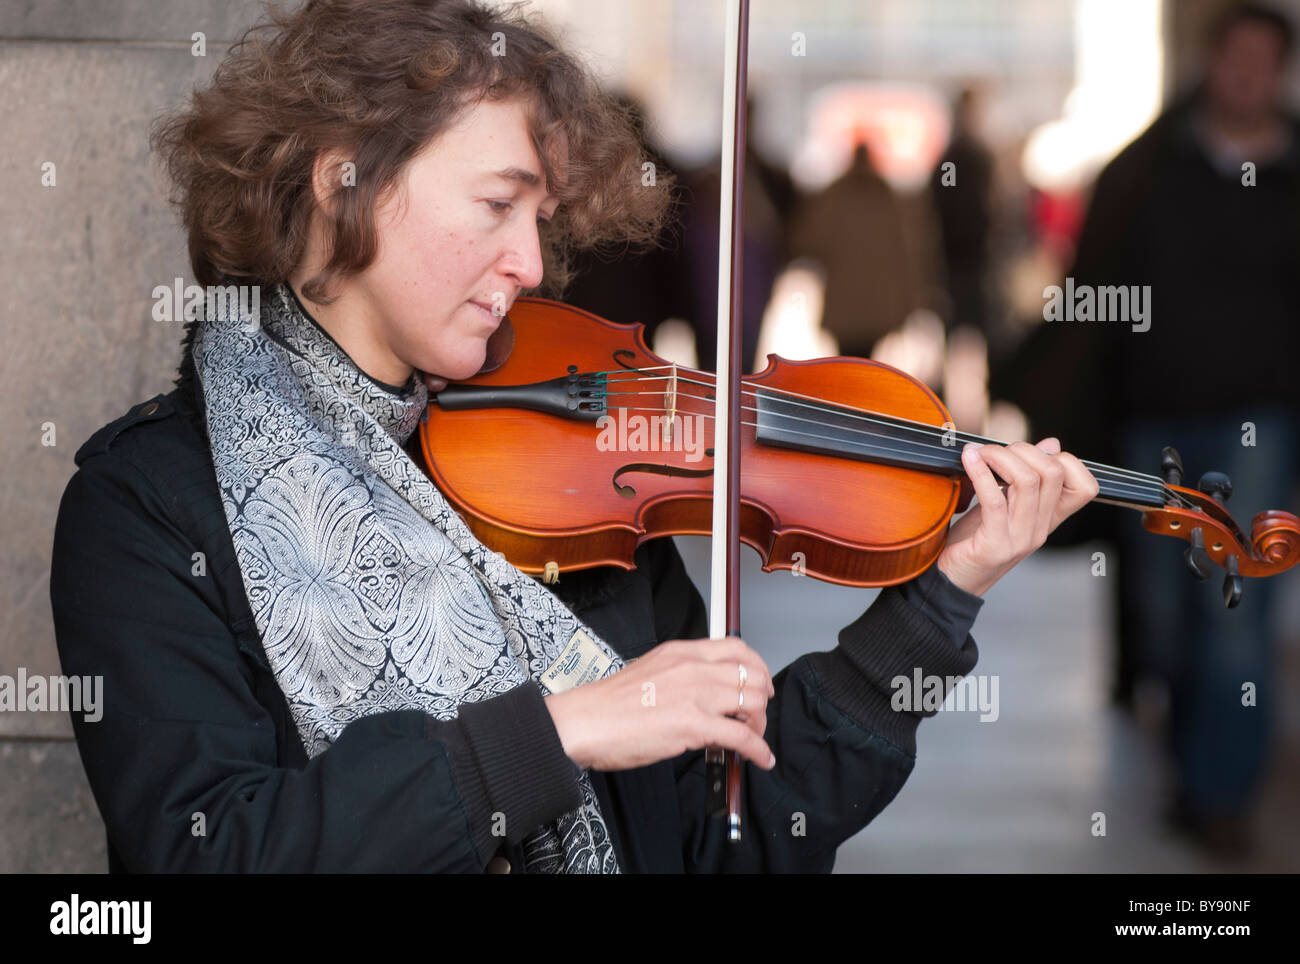 Violinist in Dresden, Saxony, Germany, Europe Stock Photo